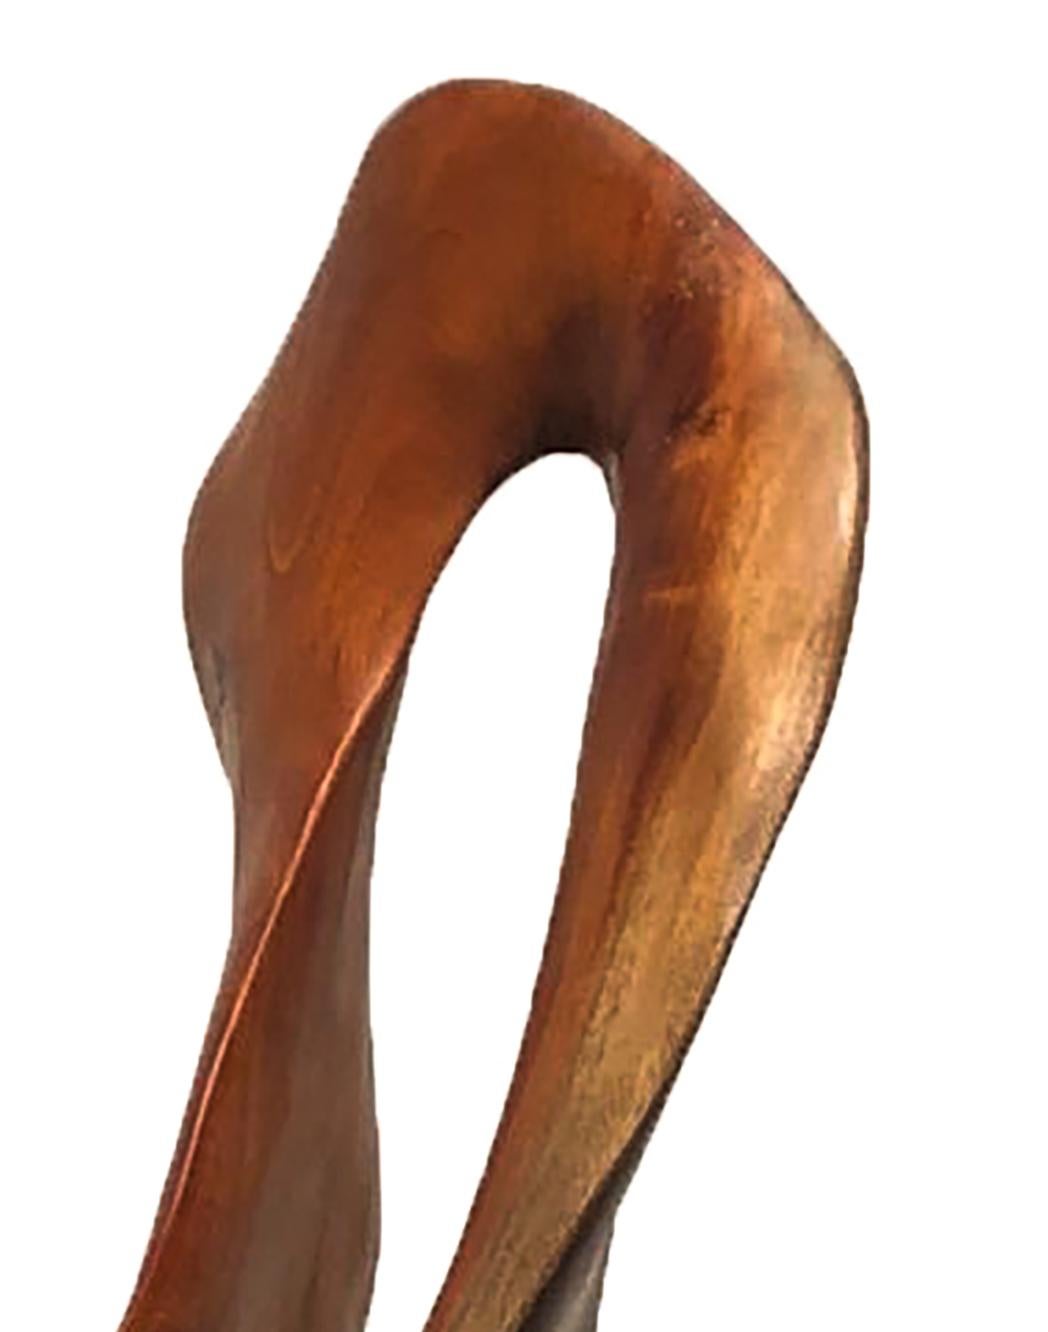 Equilibri - 21st Century, Contemporary, Abstract Sculpture, Mahogany Wood, Root 3